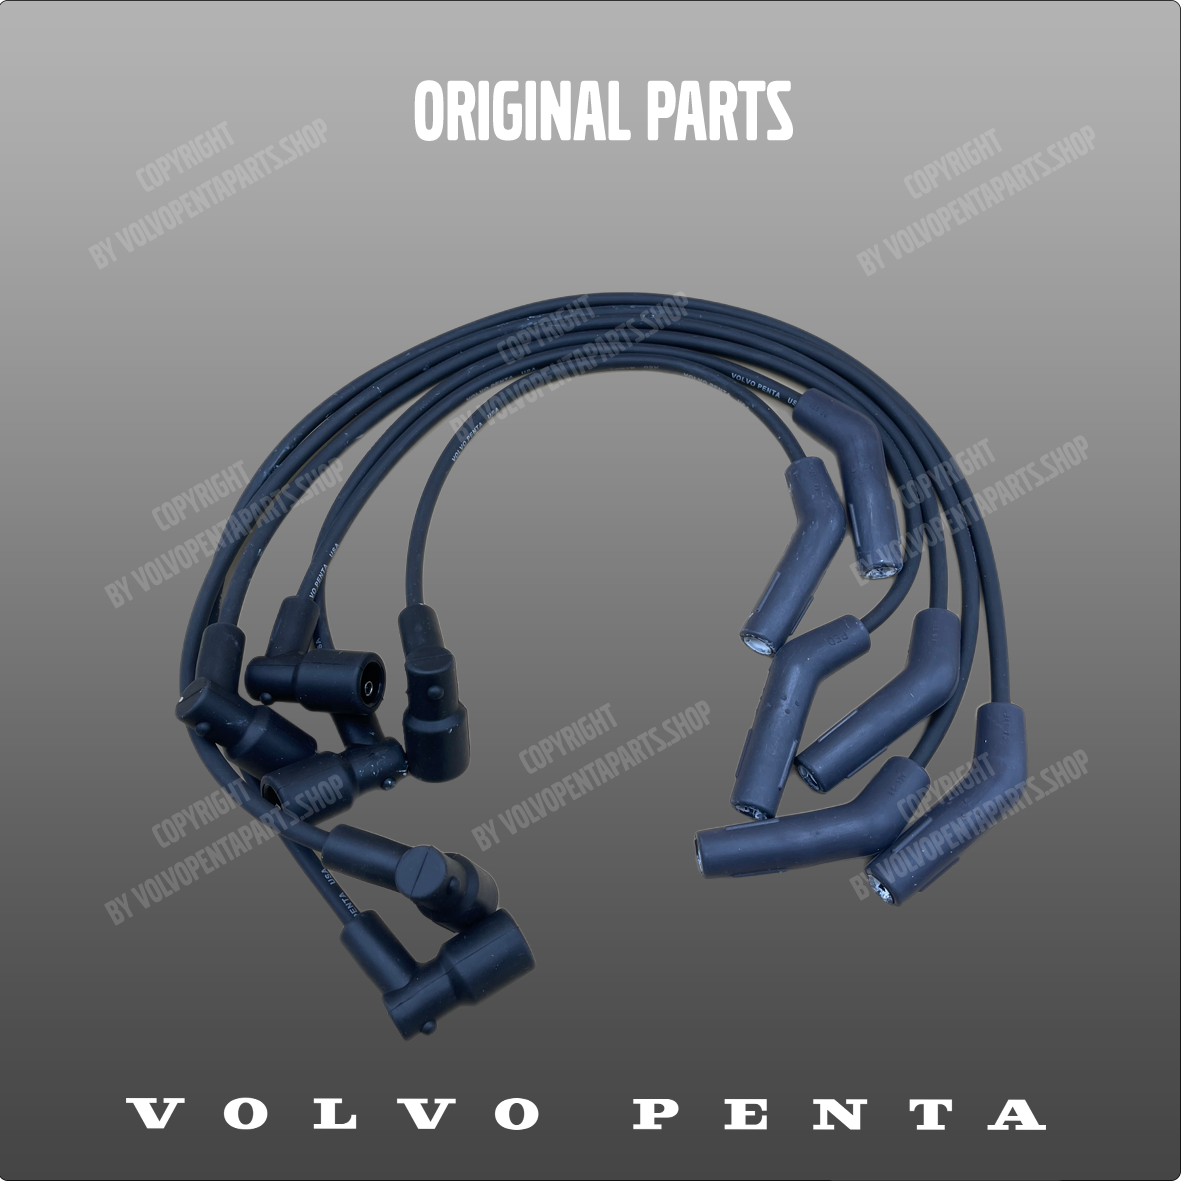 Volvo Penta ignition cable kit 23277049